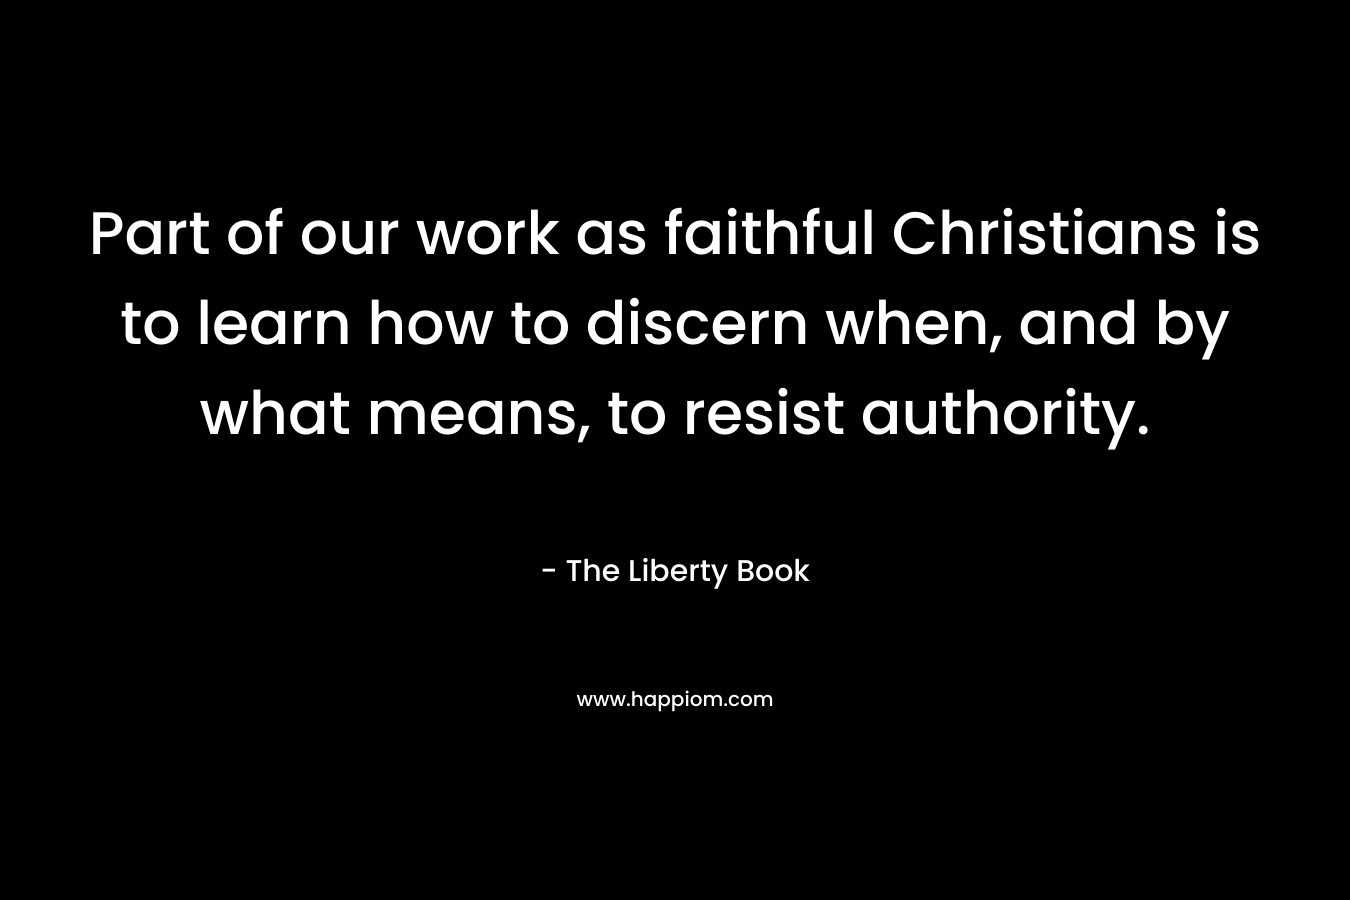 Part of our work as faithful Christians is to learn how to discern when, and by what means, to resist authority.